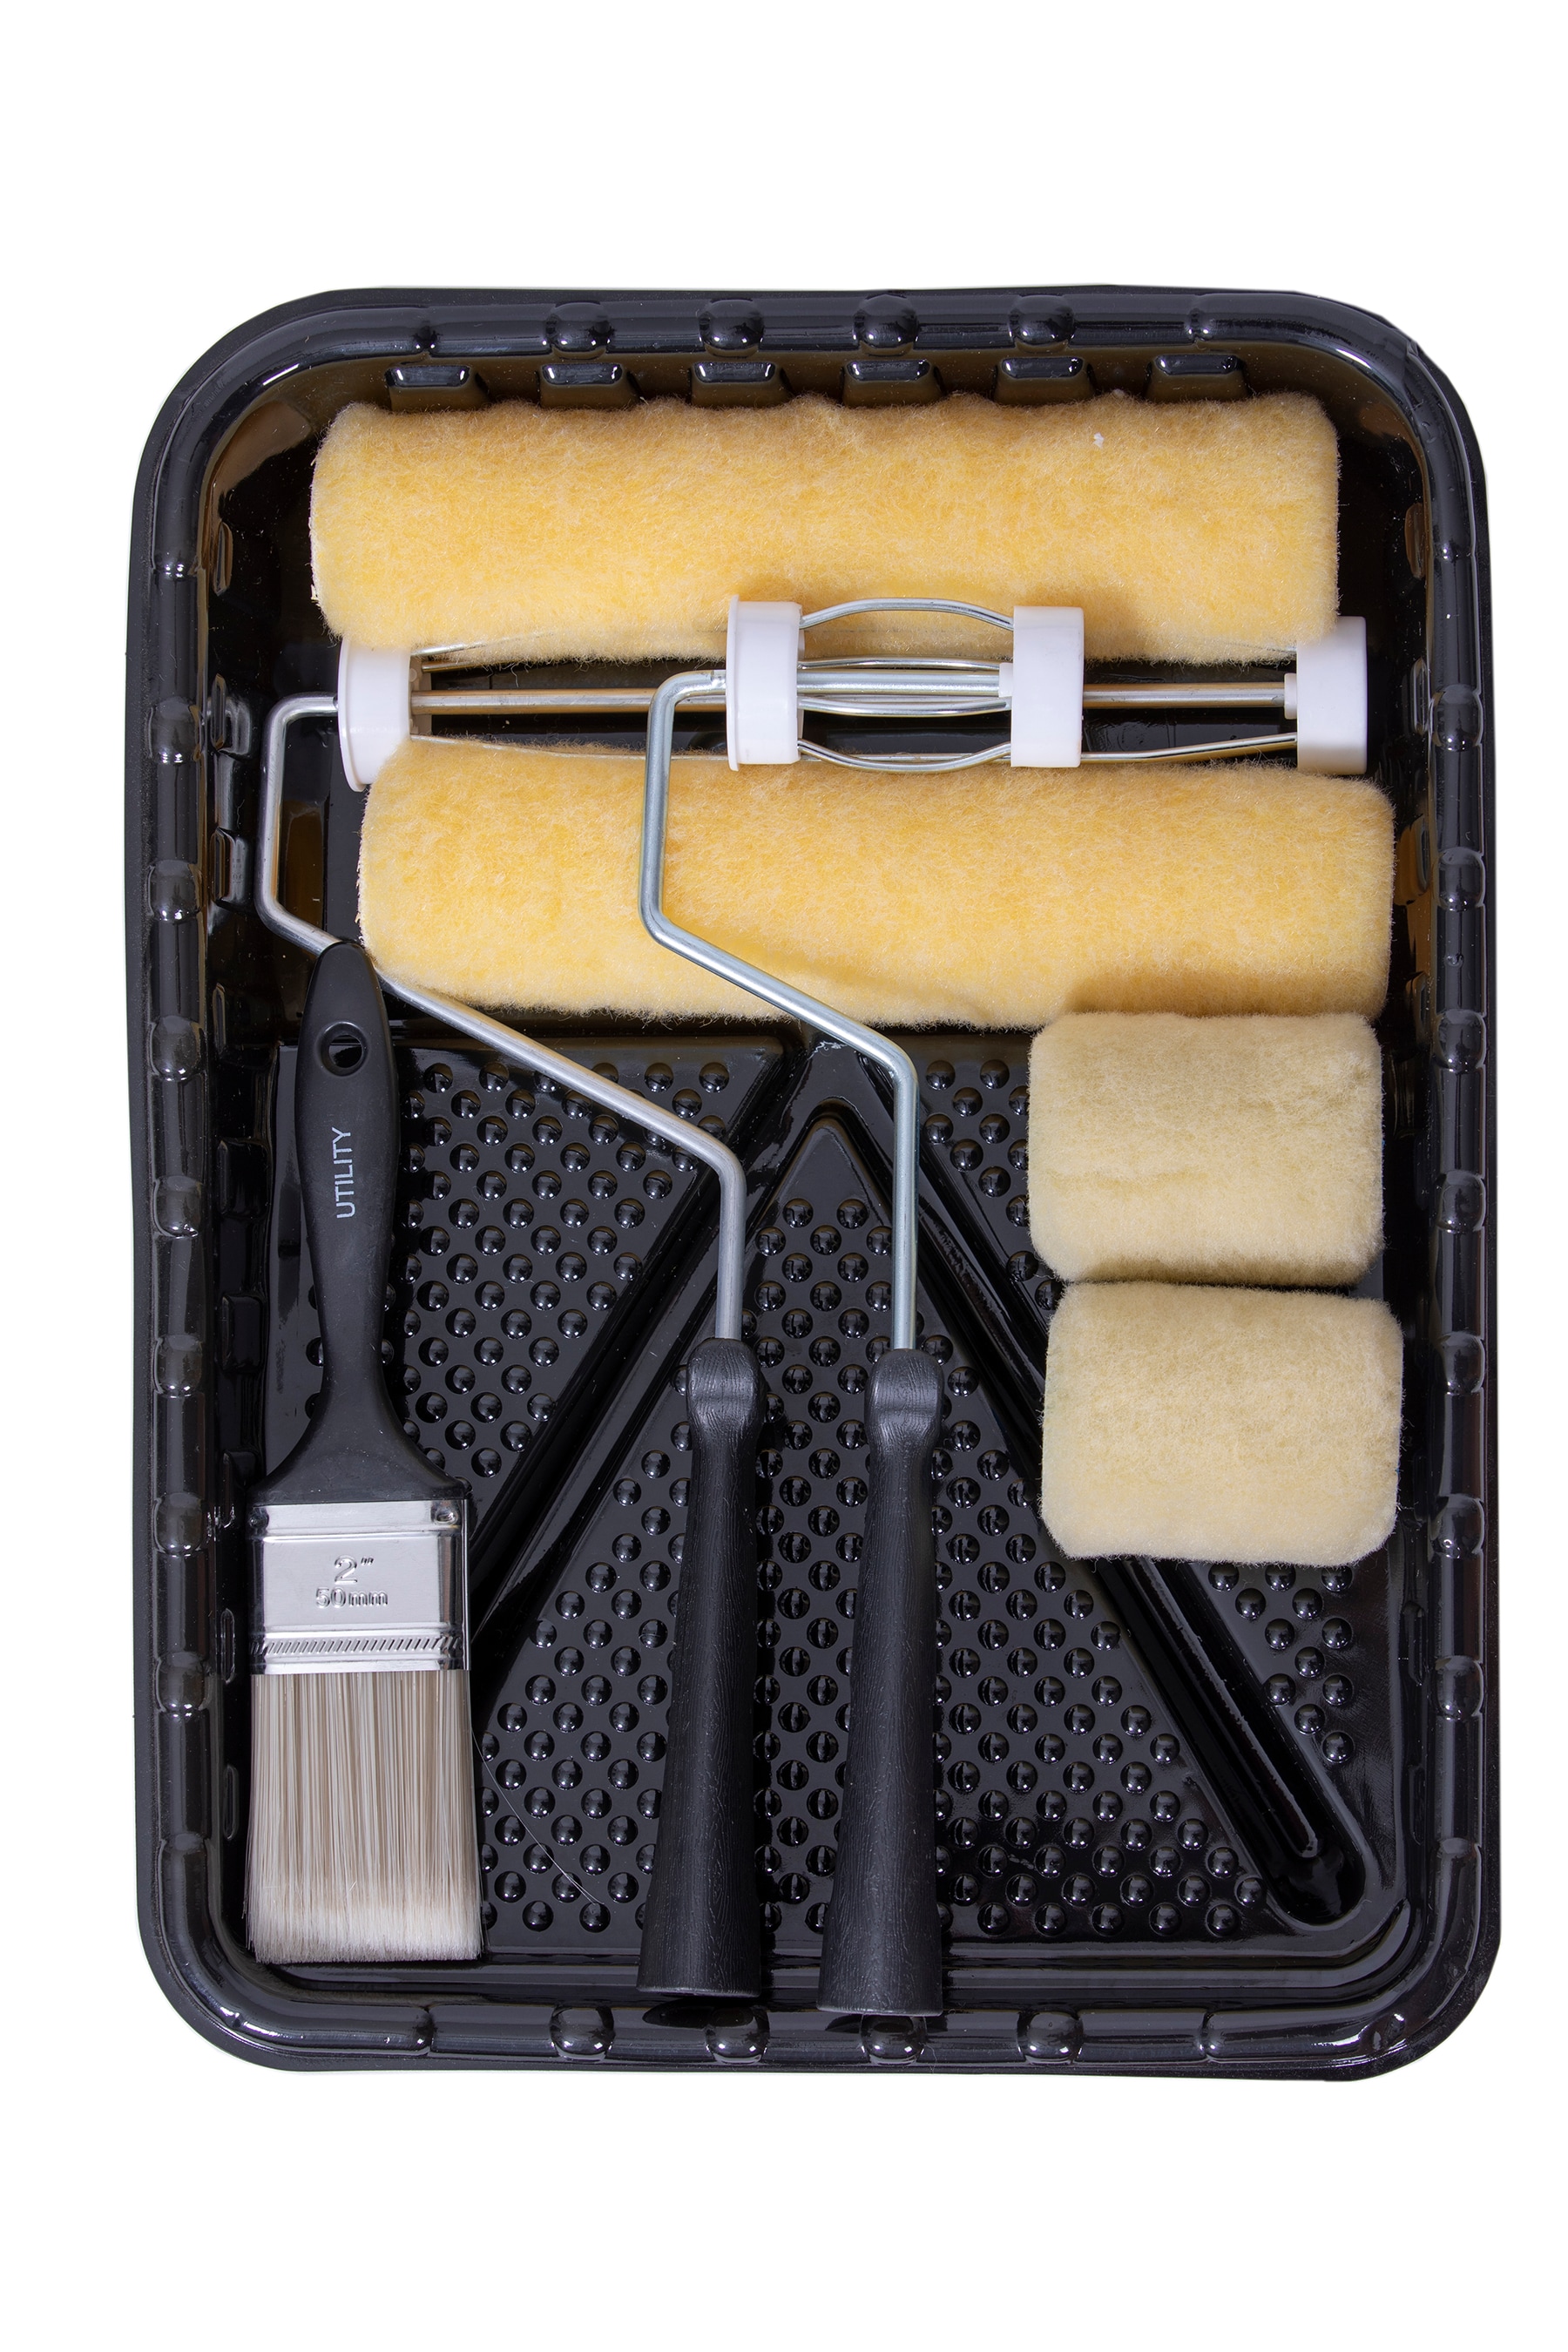 Polyester Roller Brush Kit, Rollers Painting Walls